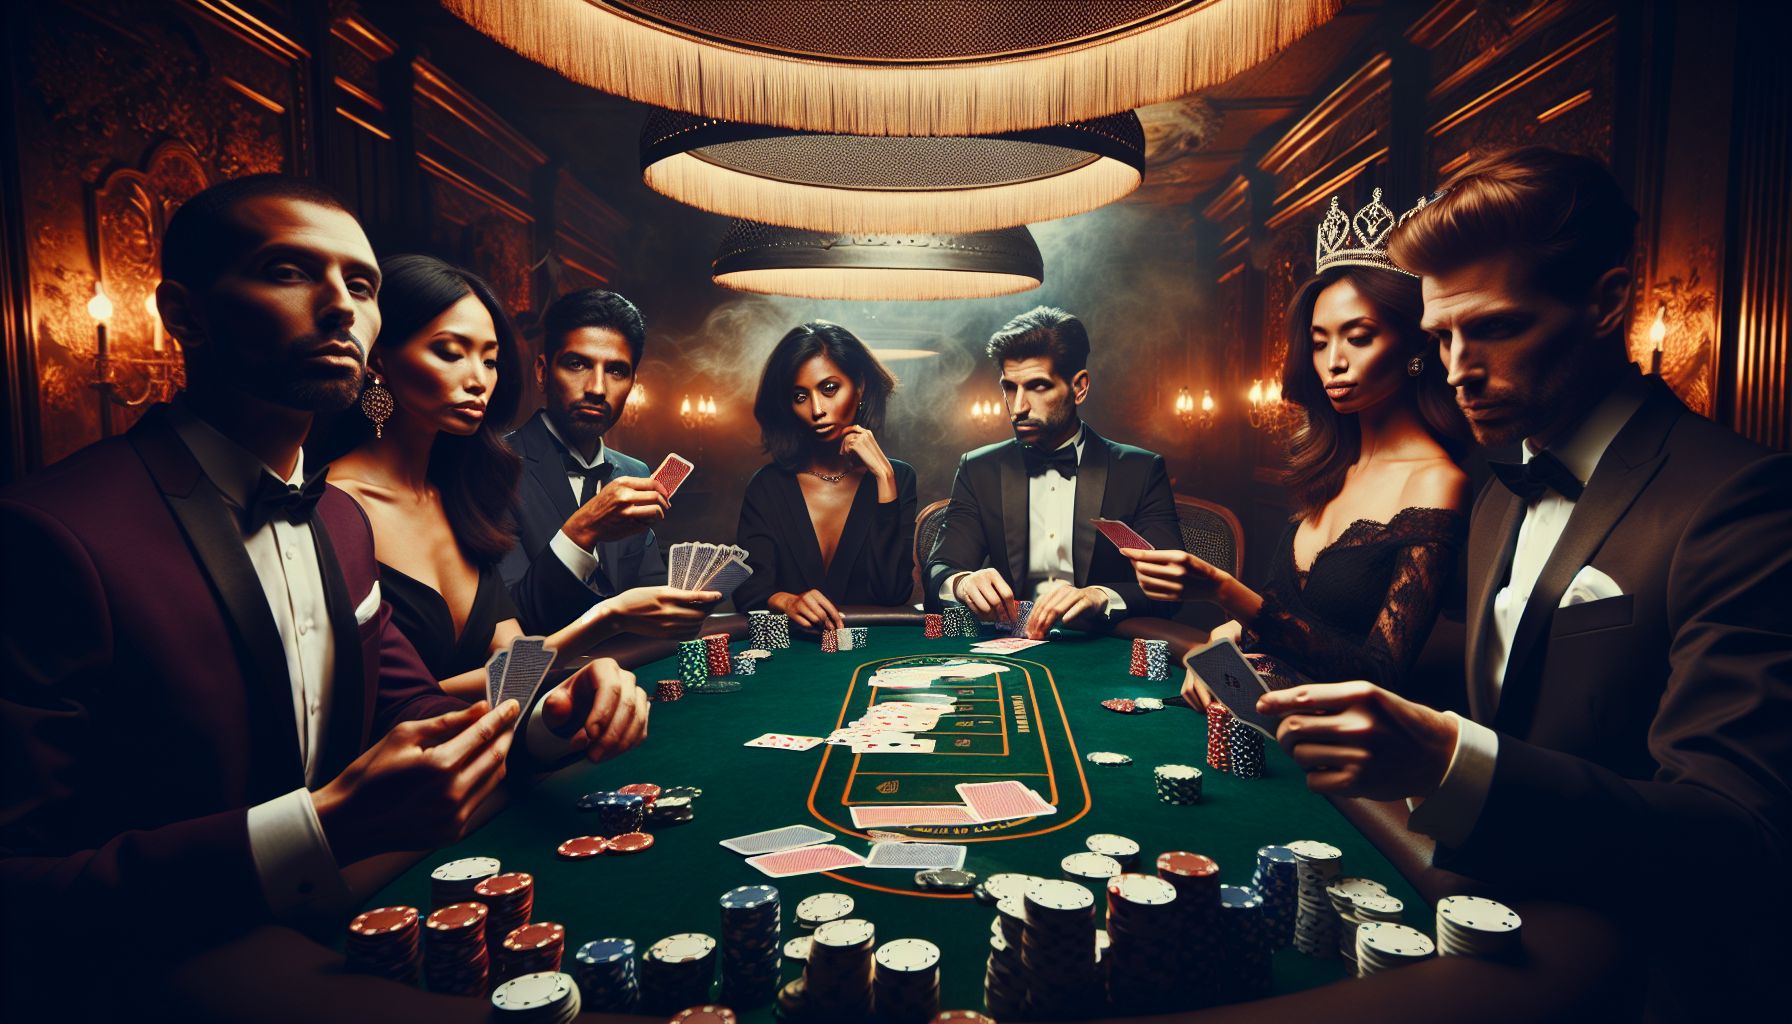 Discover the World of High-Stakes Gambling with “Card Shark Chronicles: Tales from the Gambling Table”